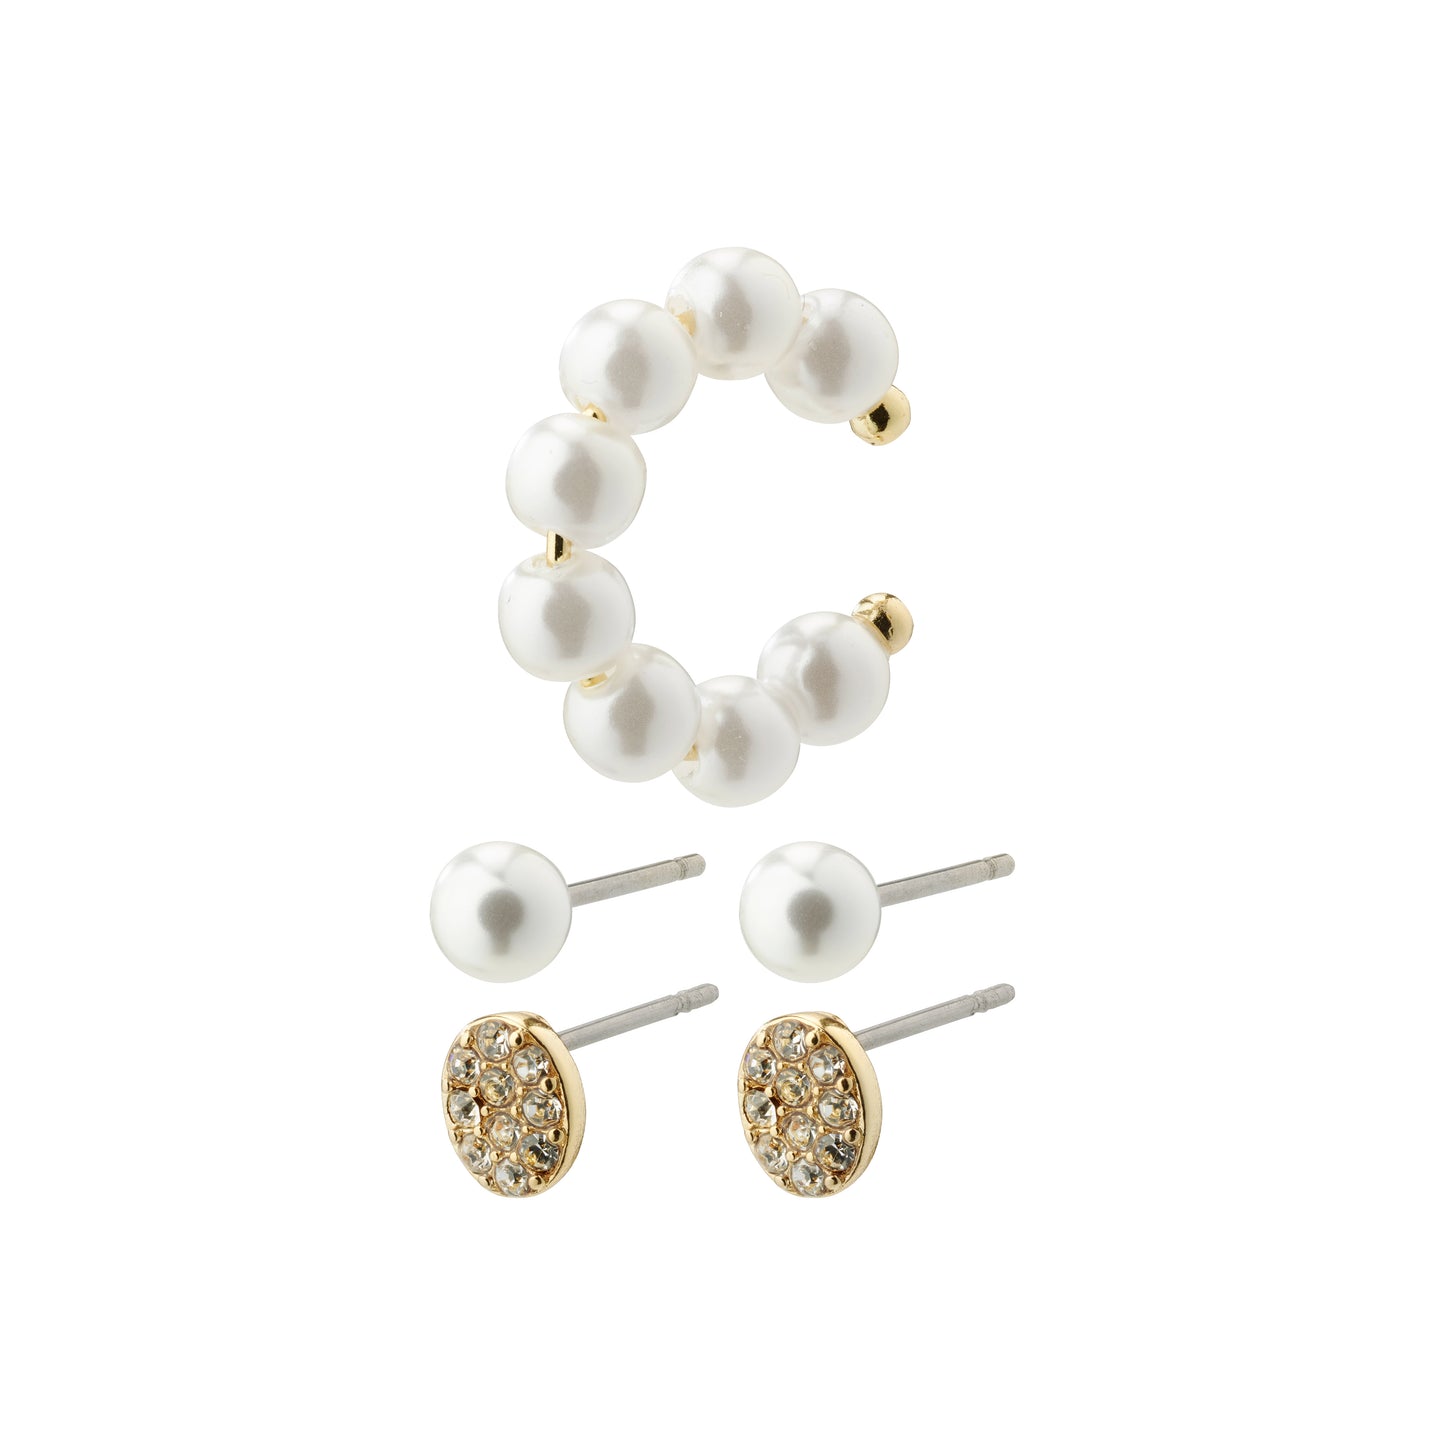 BEAT earrings and cuff, 3-in-1 set, gold-plated